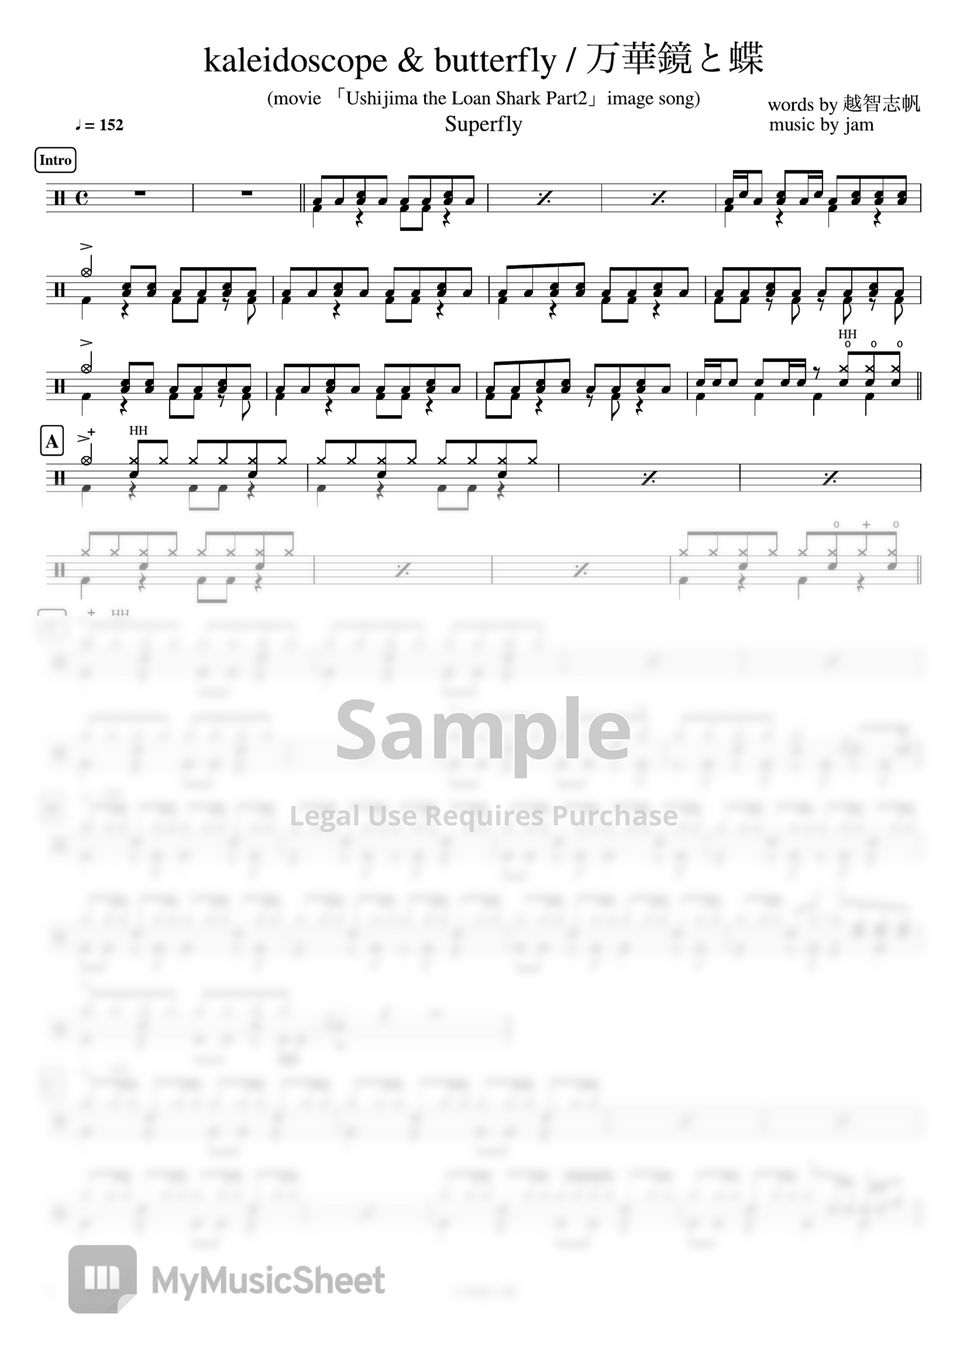 Superfly - kaleidoscope &amp; butterfly / 万華鏡と蝶 by Cookai's J-pop Drum sheet music!!!